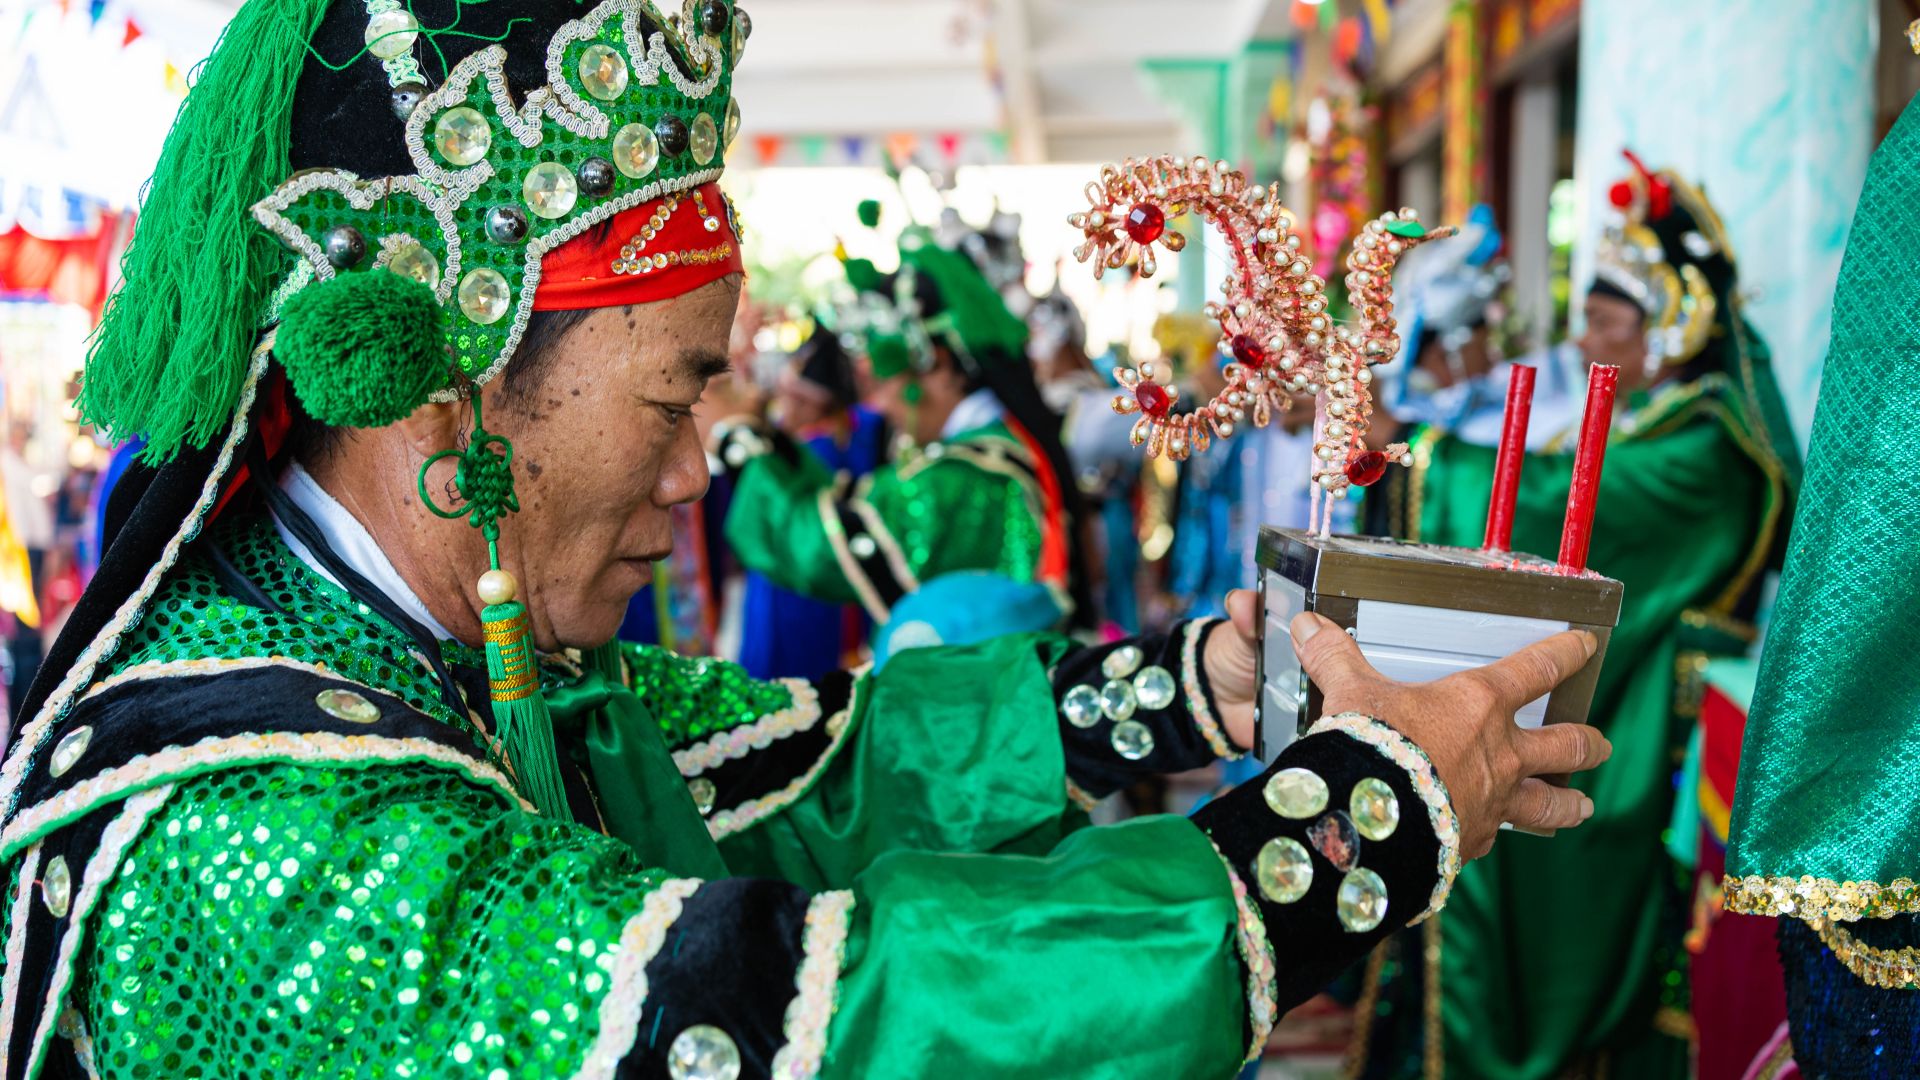 A photo of whale worshippers in elaborate dress carrying candles and flowers as offerings during Phuoc Hai’s whale worship festival.